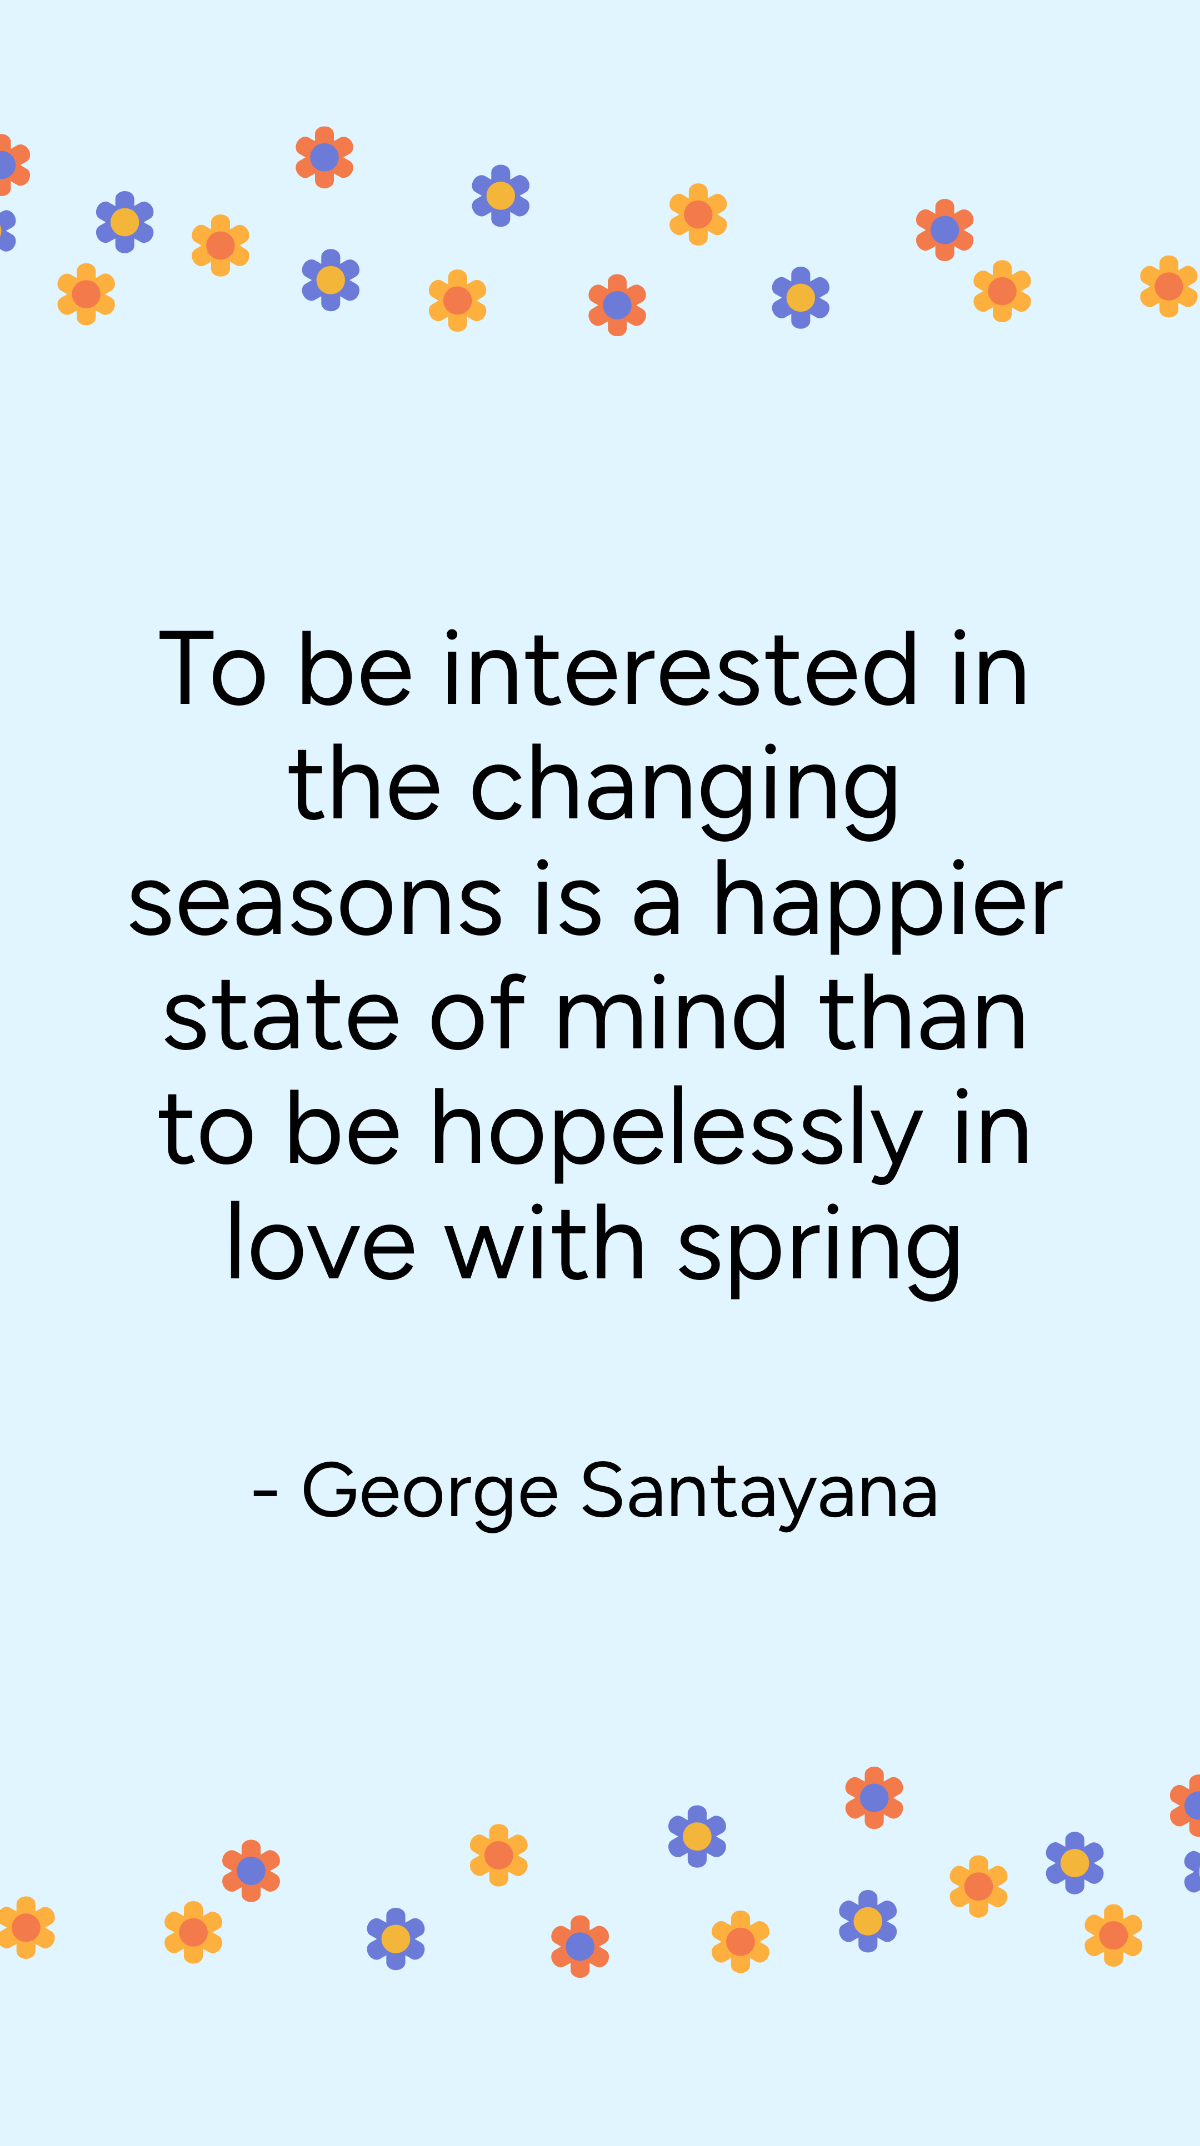 George Santayana - To be interested in the changing seasons is a happier state of mind than to be hopelessly in love with spring